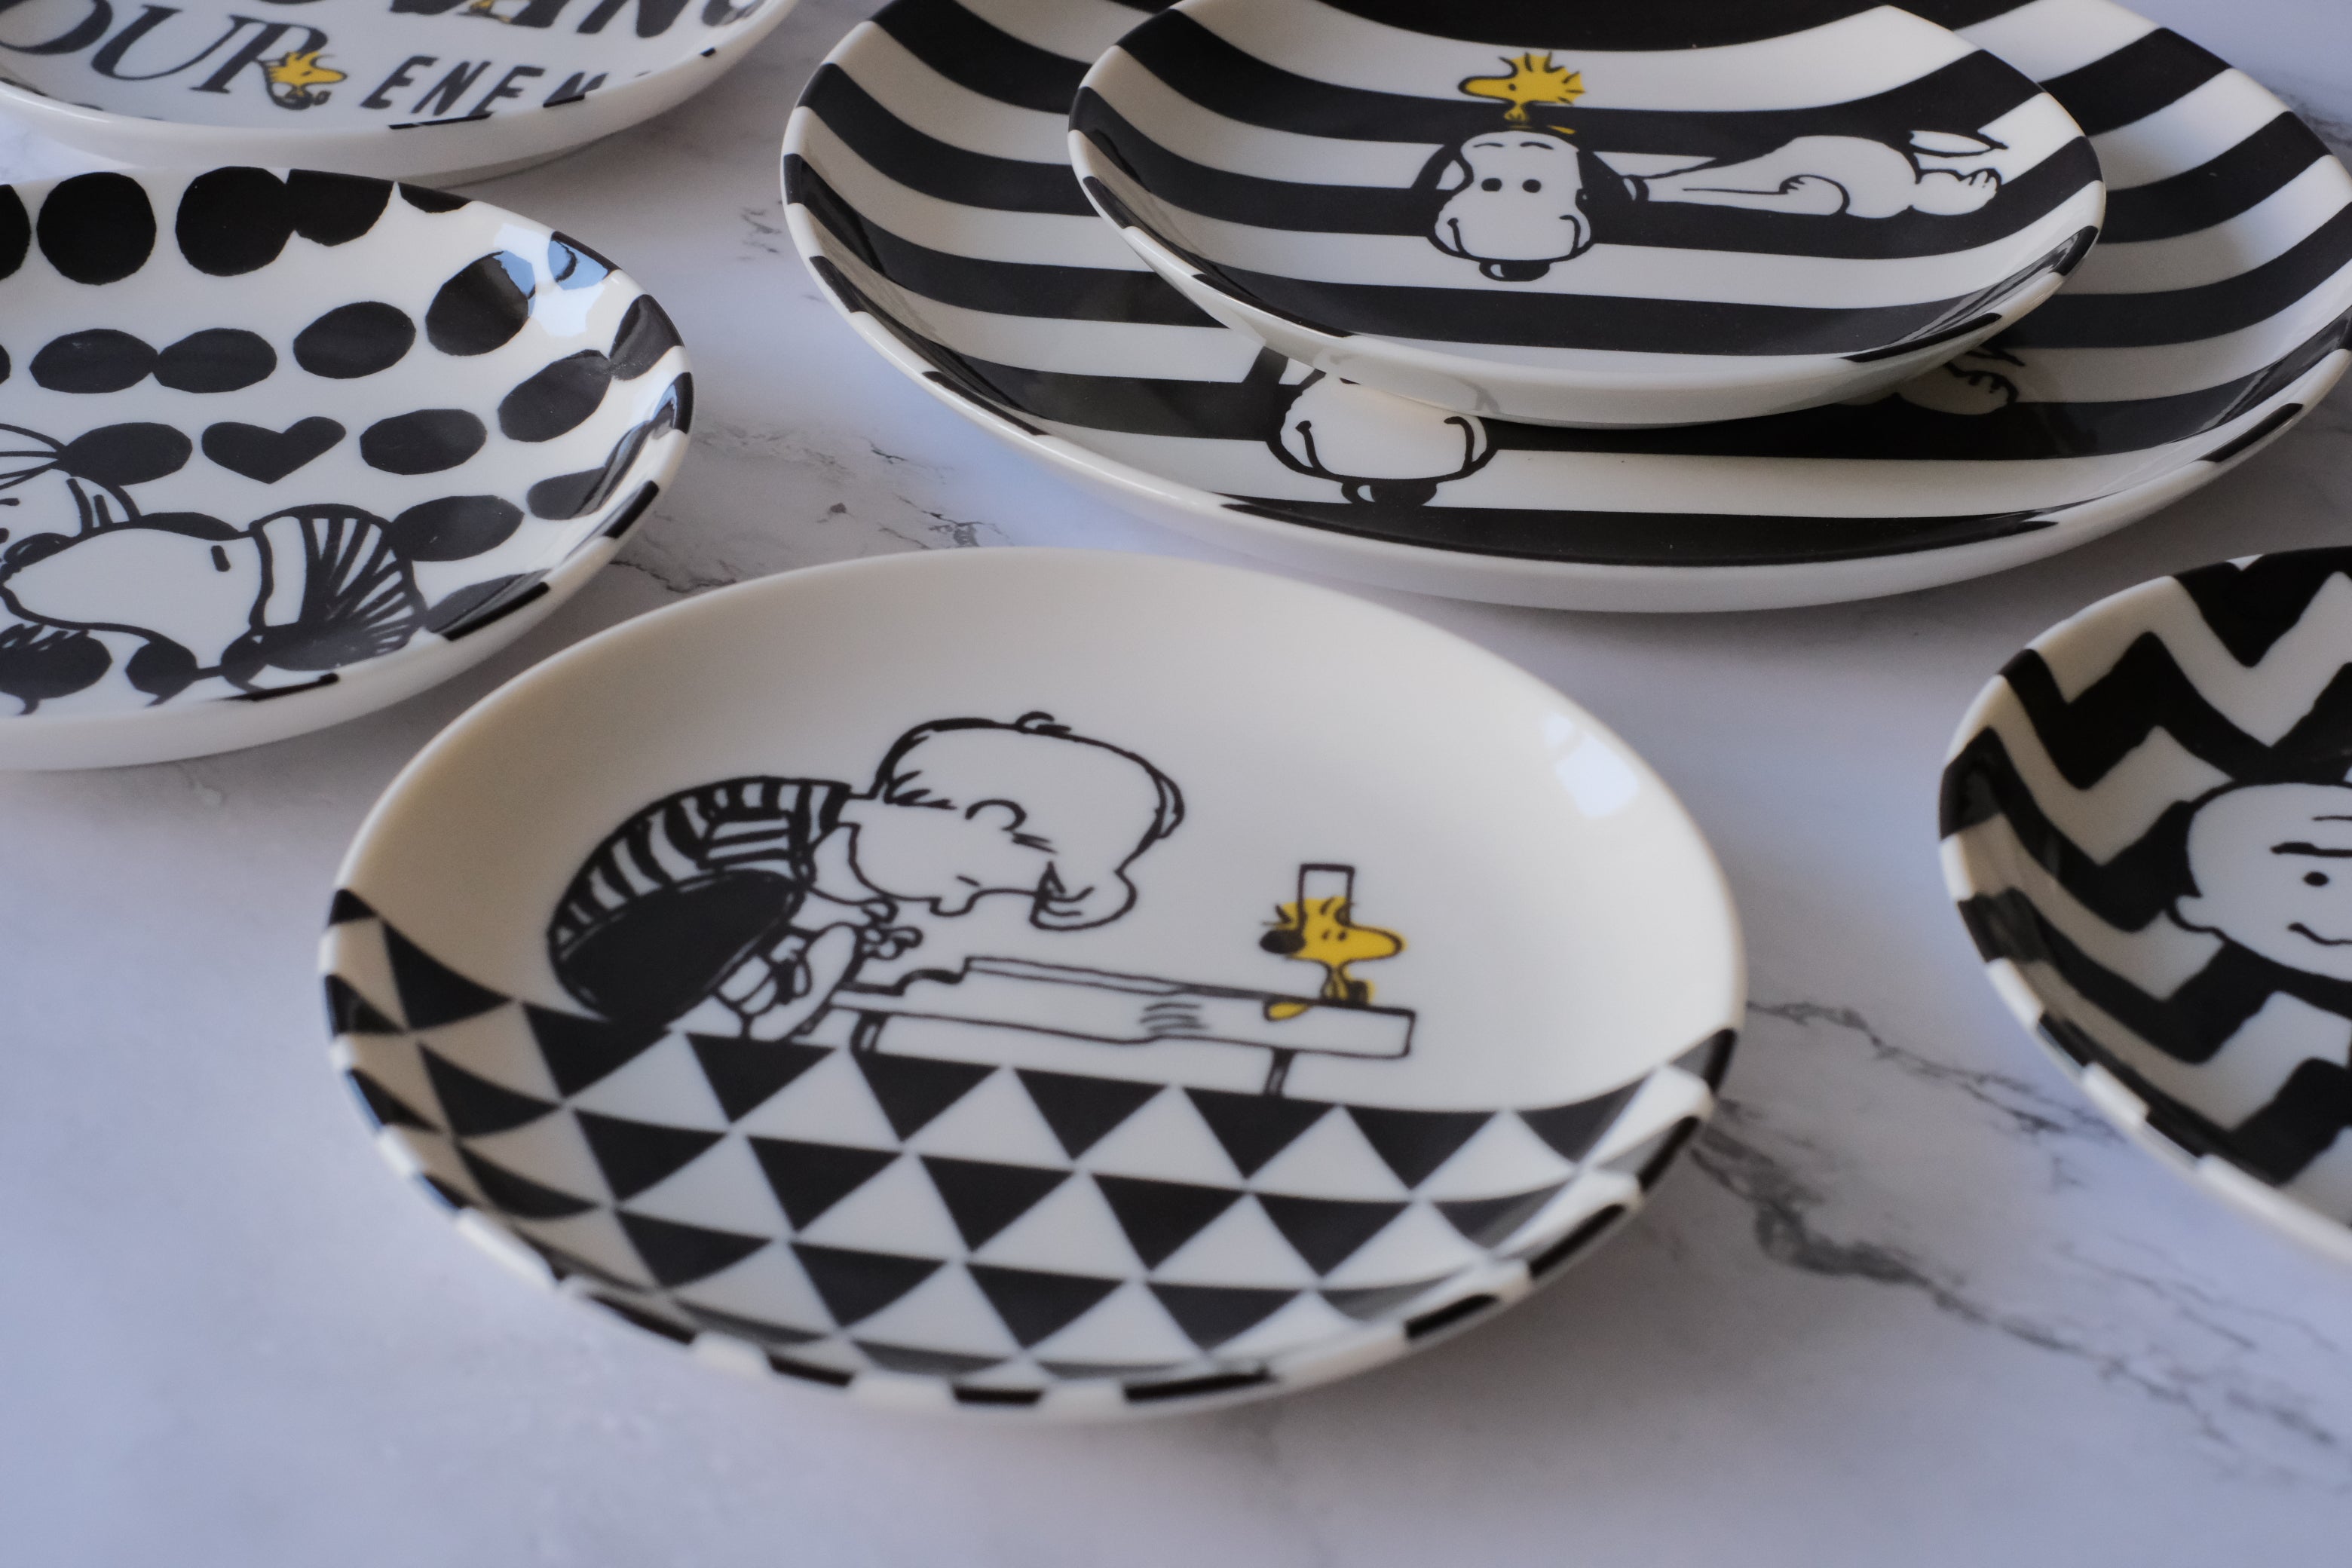 Peanuts™ Snoopy™ Stoneware Multi Section Lazy Susan